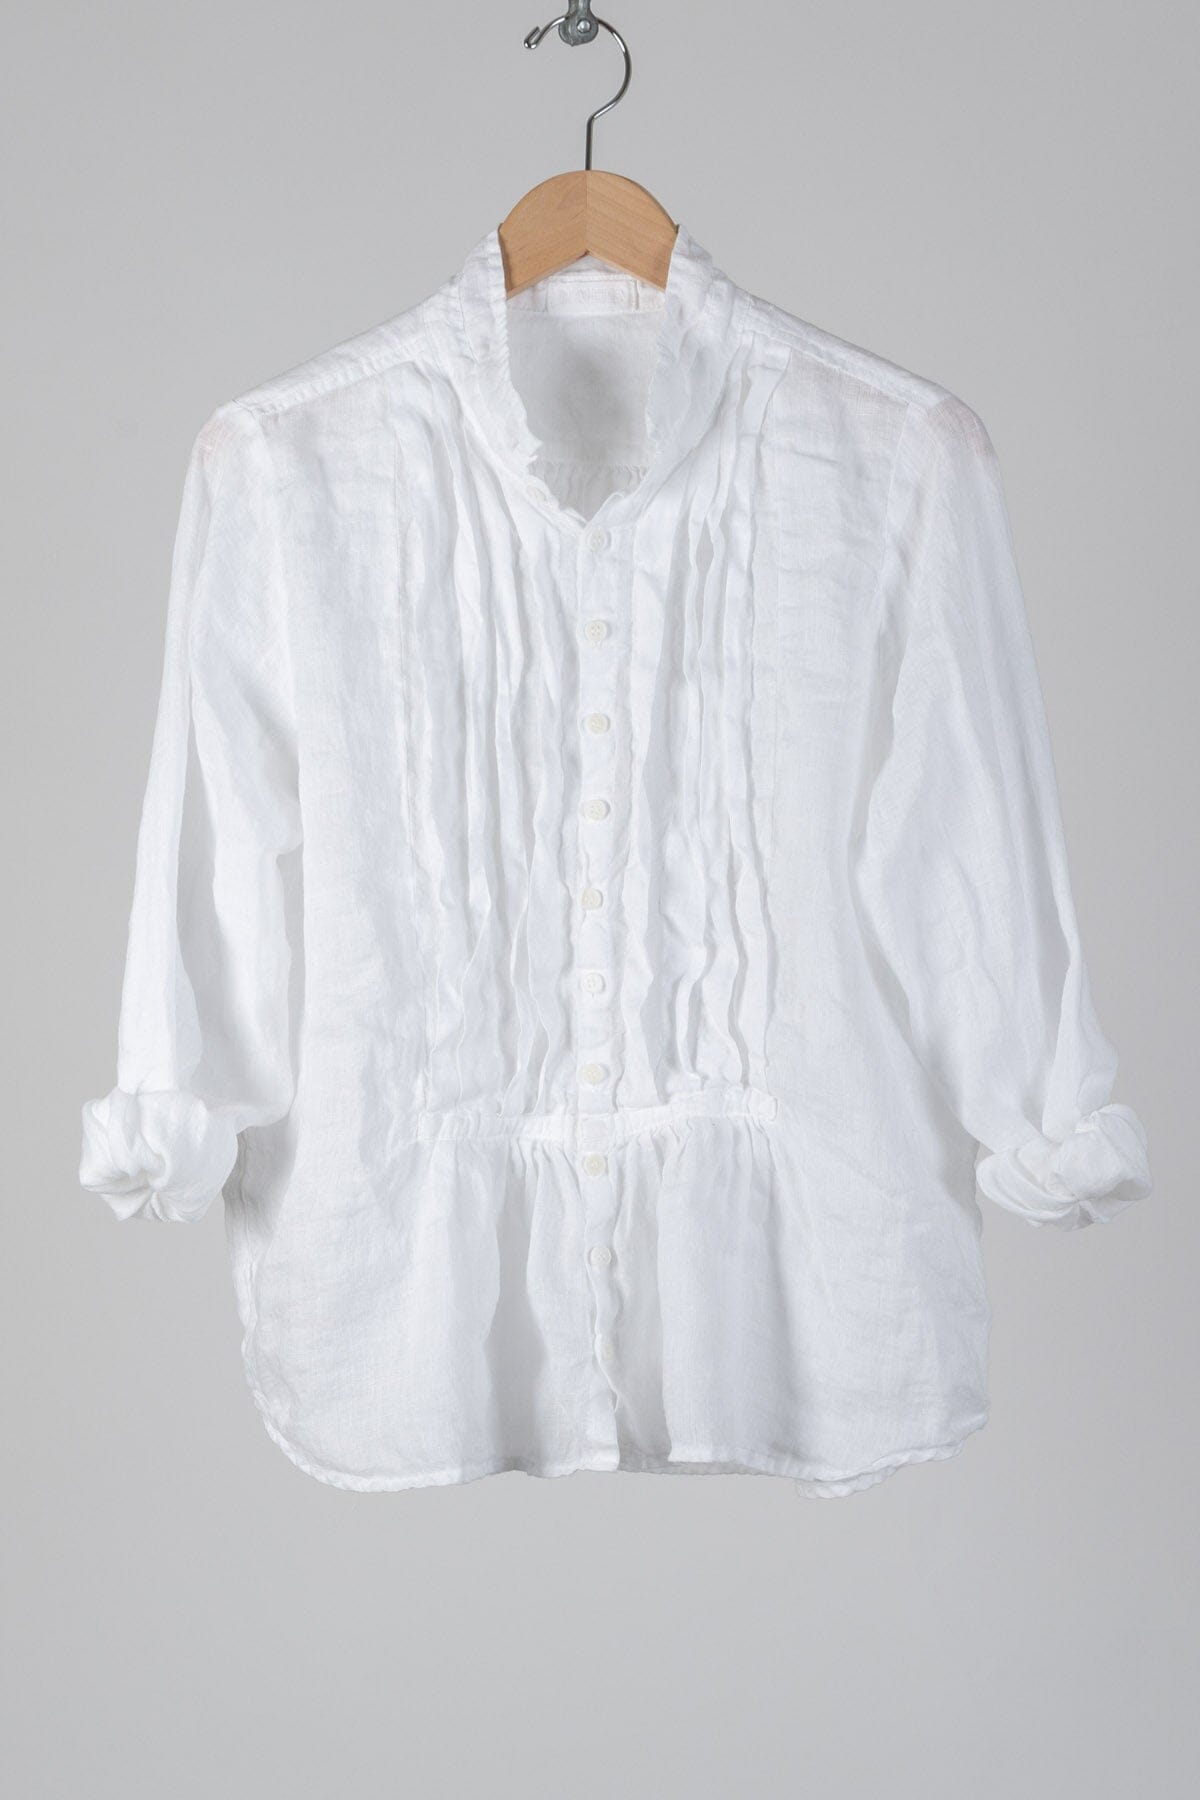 Claudine - Linen S10 - Linen Shirt/Top/Tunic CP Shades white